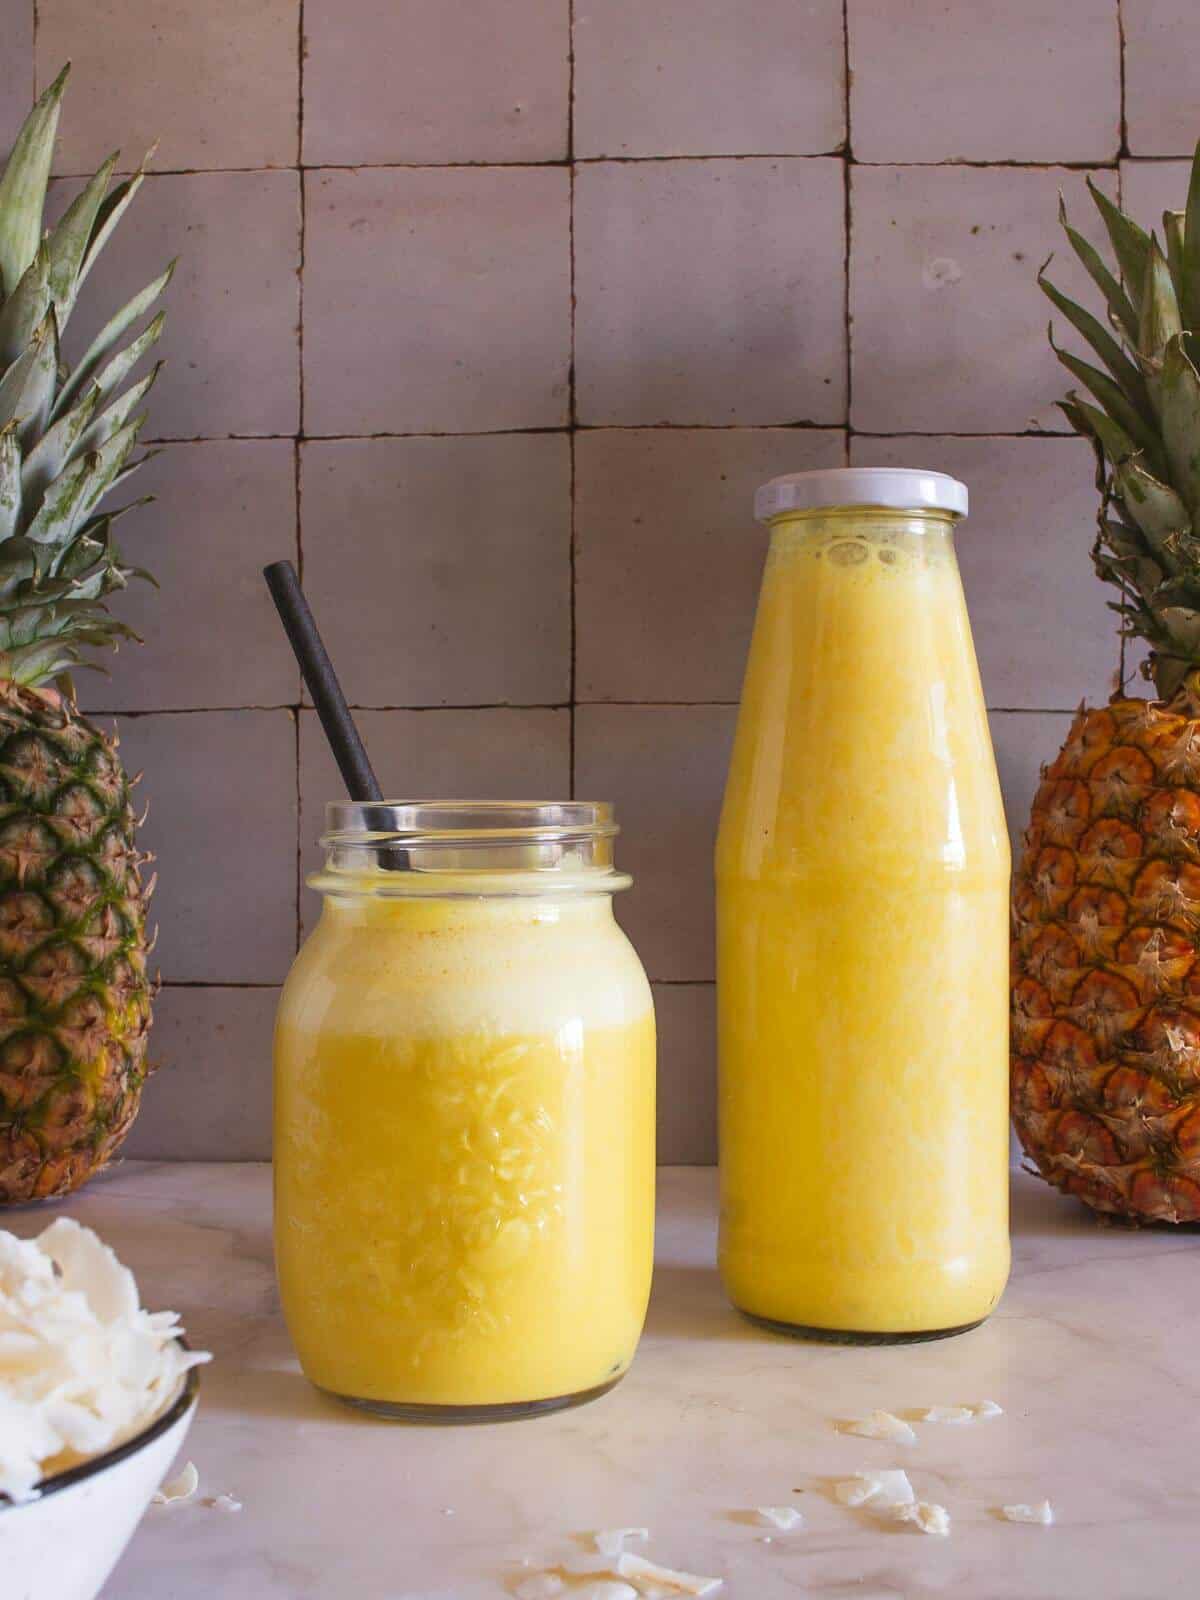 store 3-ingredient pineapple smoothie in an airtight container